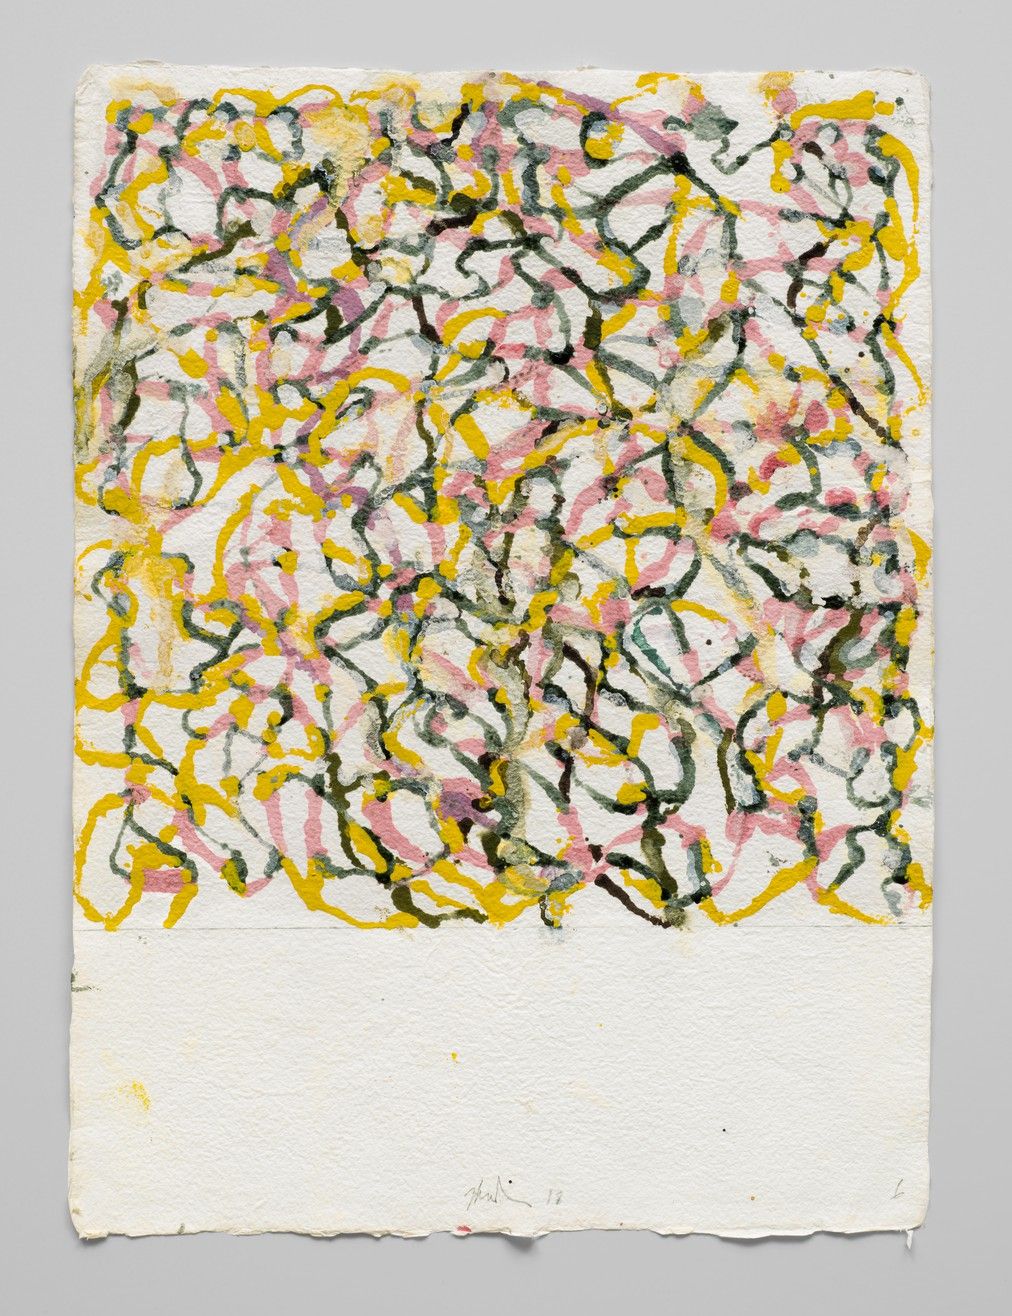 Marrakech Drawing 6, Brice Marden, 2017-2018 <br> ⓒ2018 Brice Marden/Artists Rights Society (ARS), New York